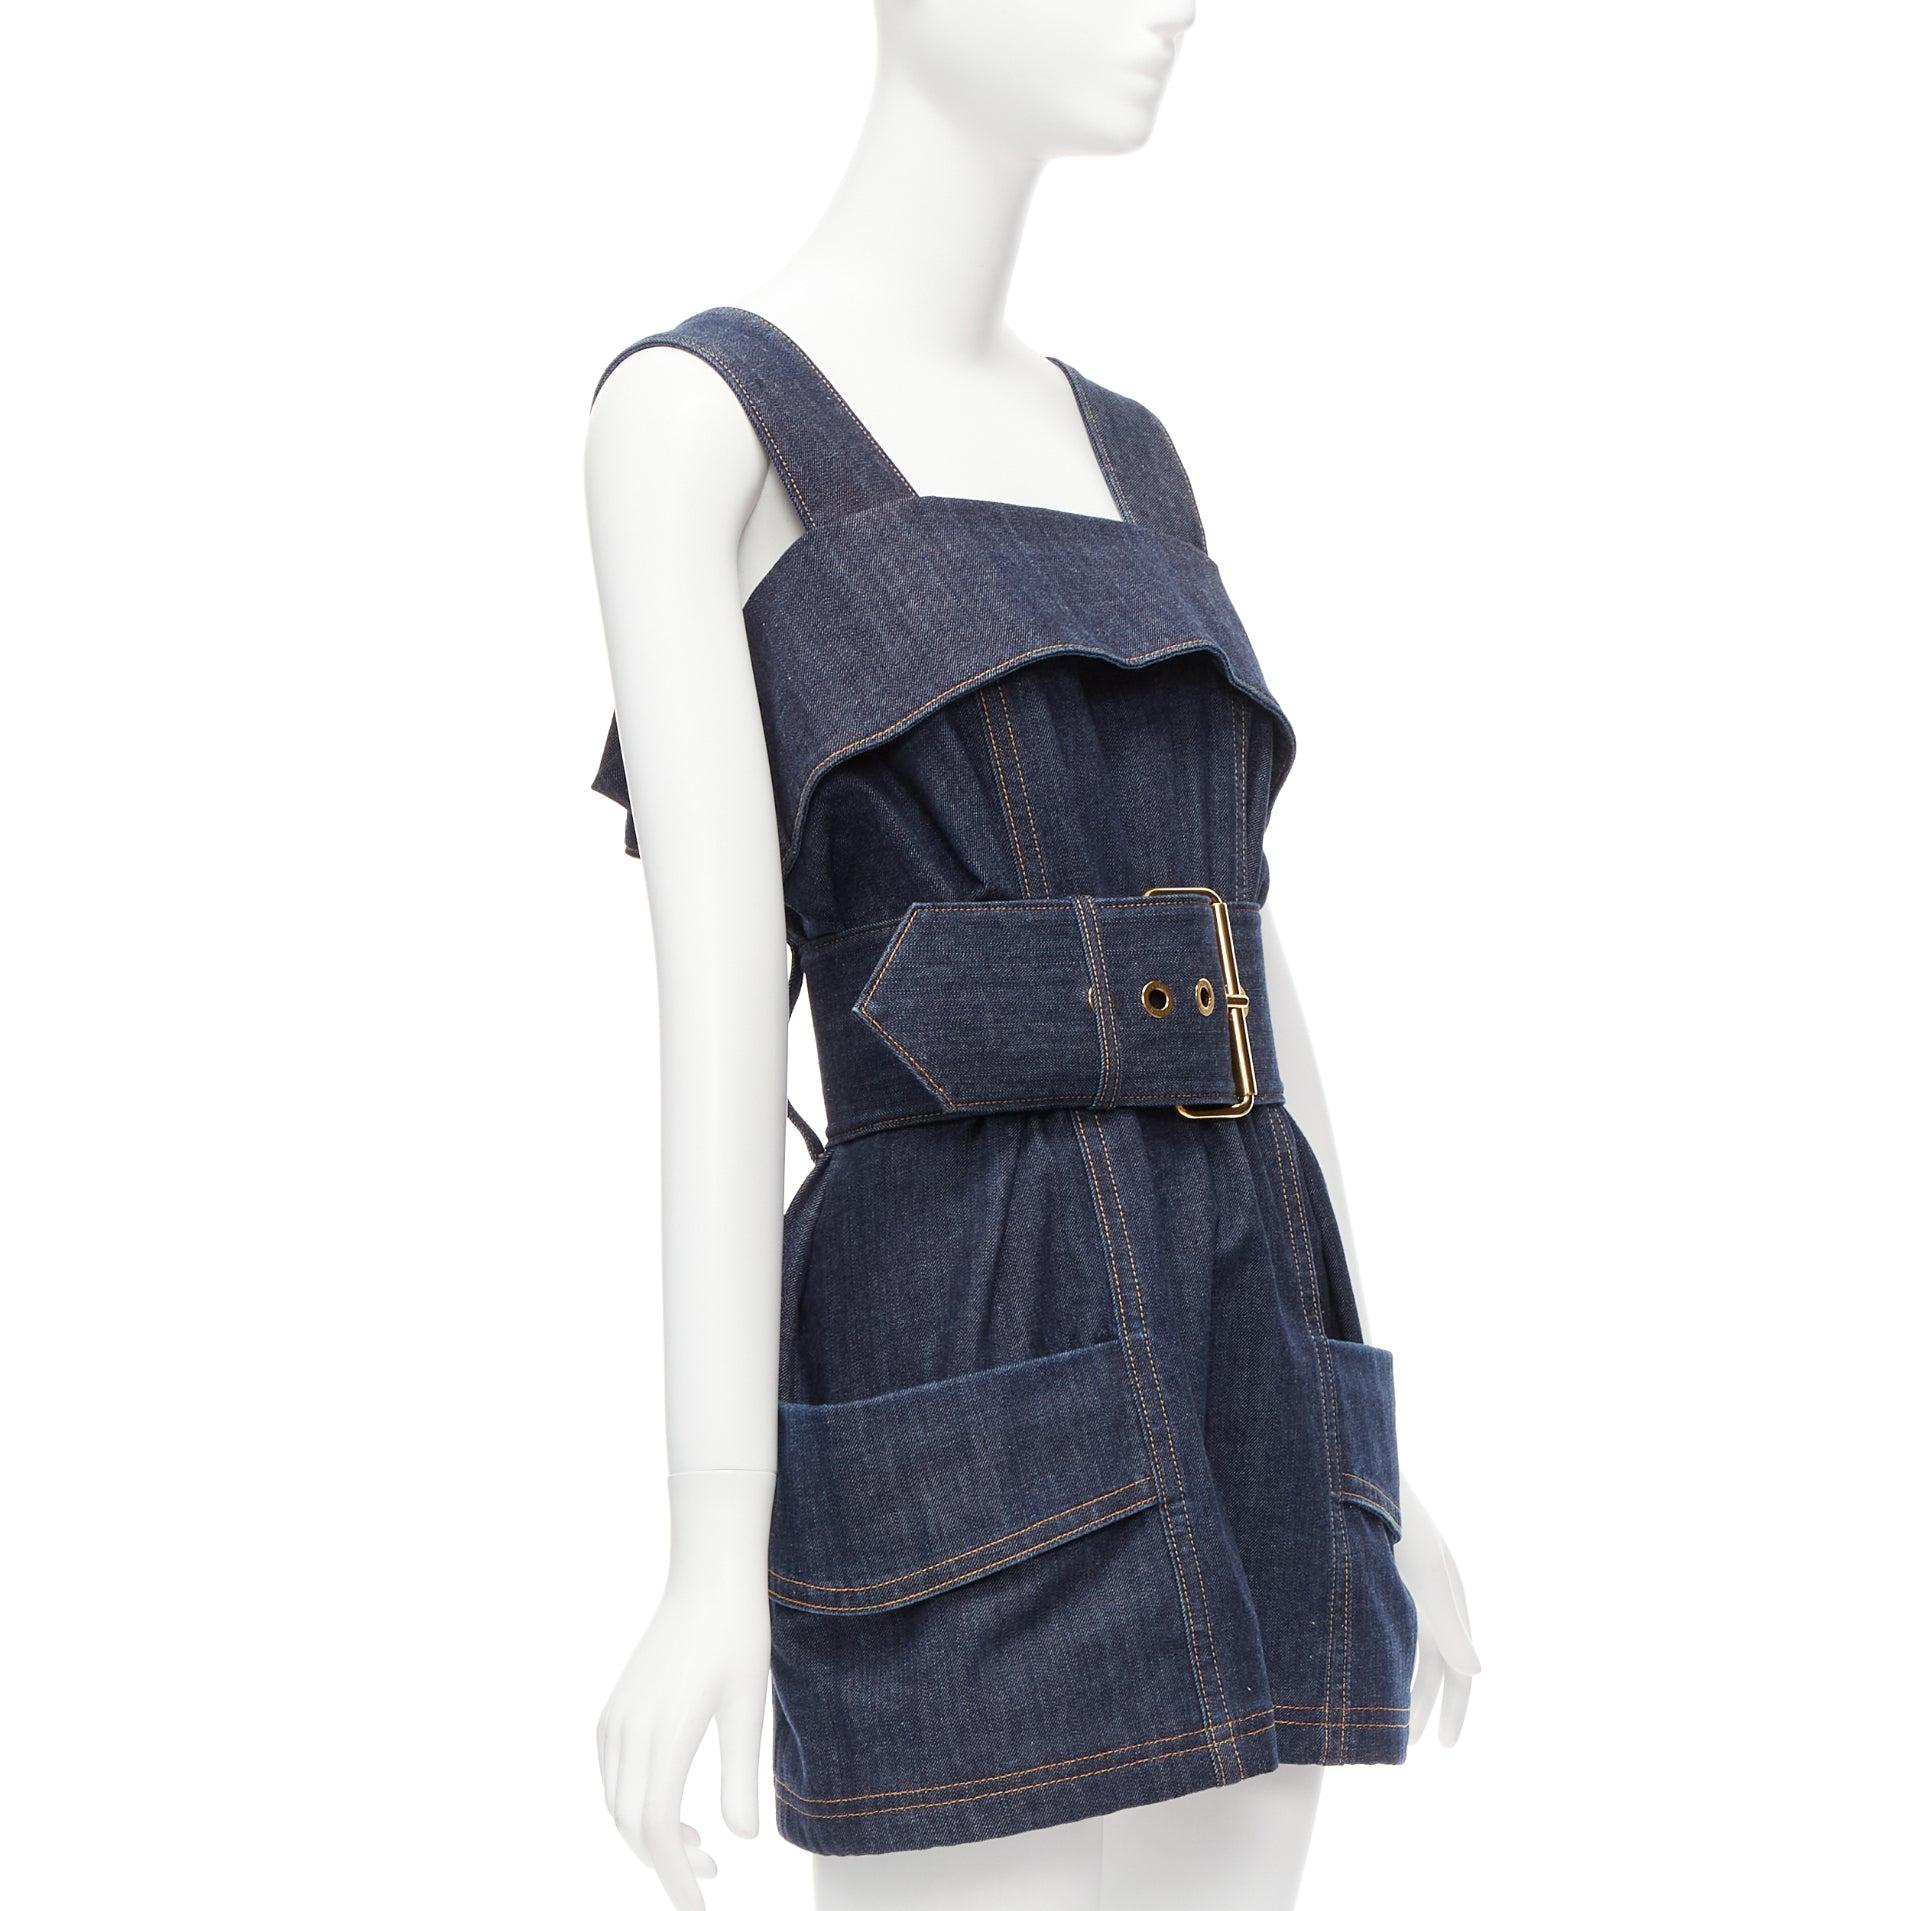 LOUIS VUITTON 2023 Runway blue denim oversized belt utility dress FR34 XS
Reference: AAWC/A00689
Brand: Louis Vuitton
Collection: 2023 - Runway
Material: Denim
Color: Blue
Pattern: Solid
Closure: Belt
Lining: Black Fabric
Extra Details: LV brown